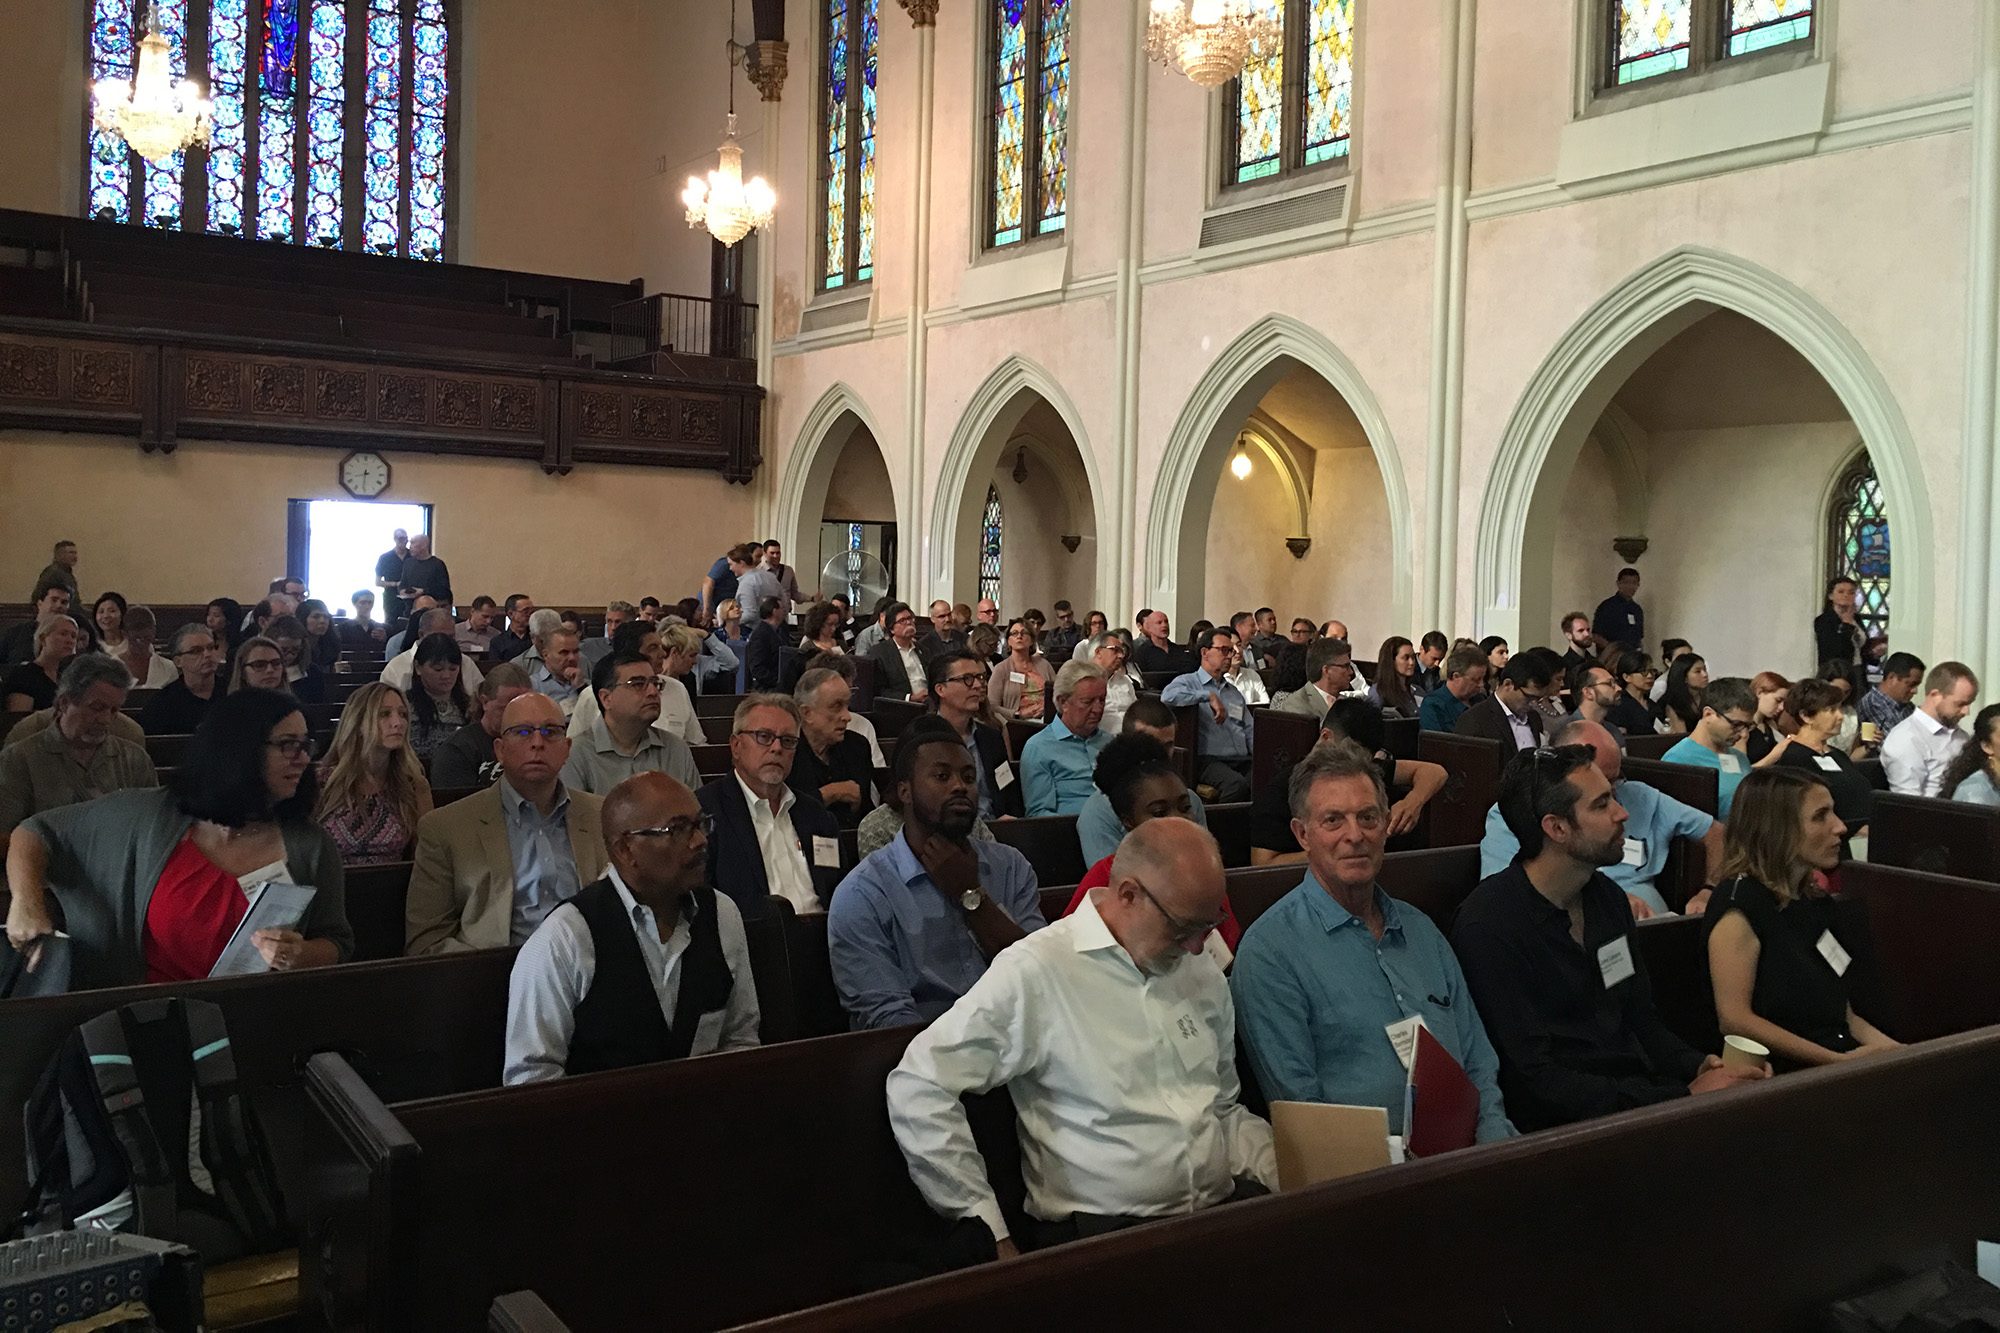 Design for Dignity conference attendees at McCarty Memorial Christian Church. Photo | <a href="http://www.paul-redmond.com/" target="_blank" rel="noopener">AIA Los Angeles</a>